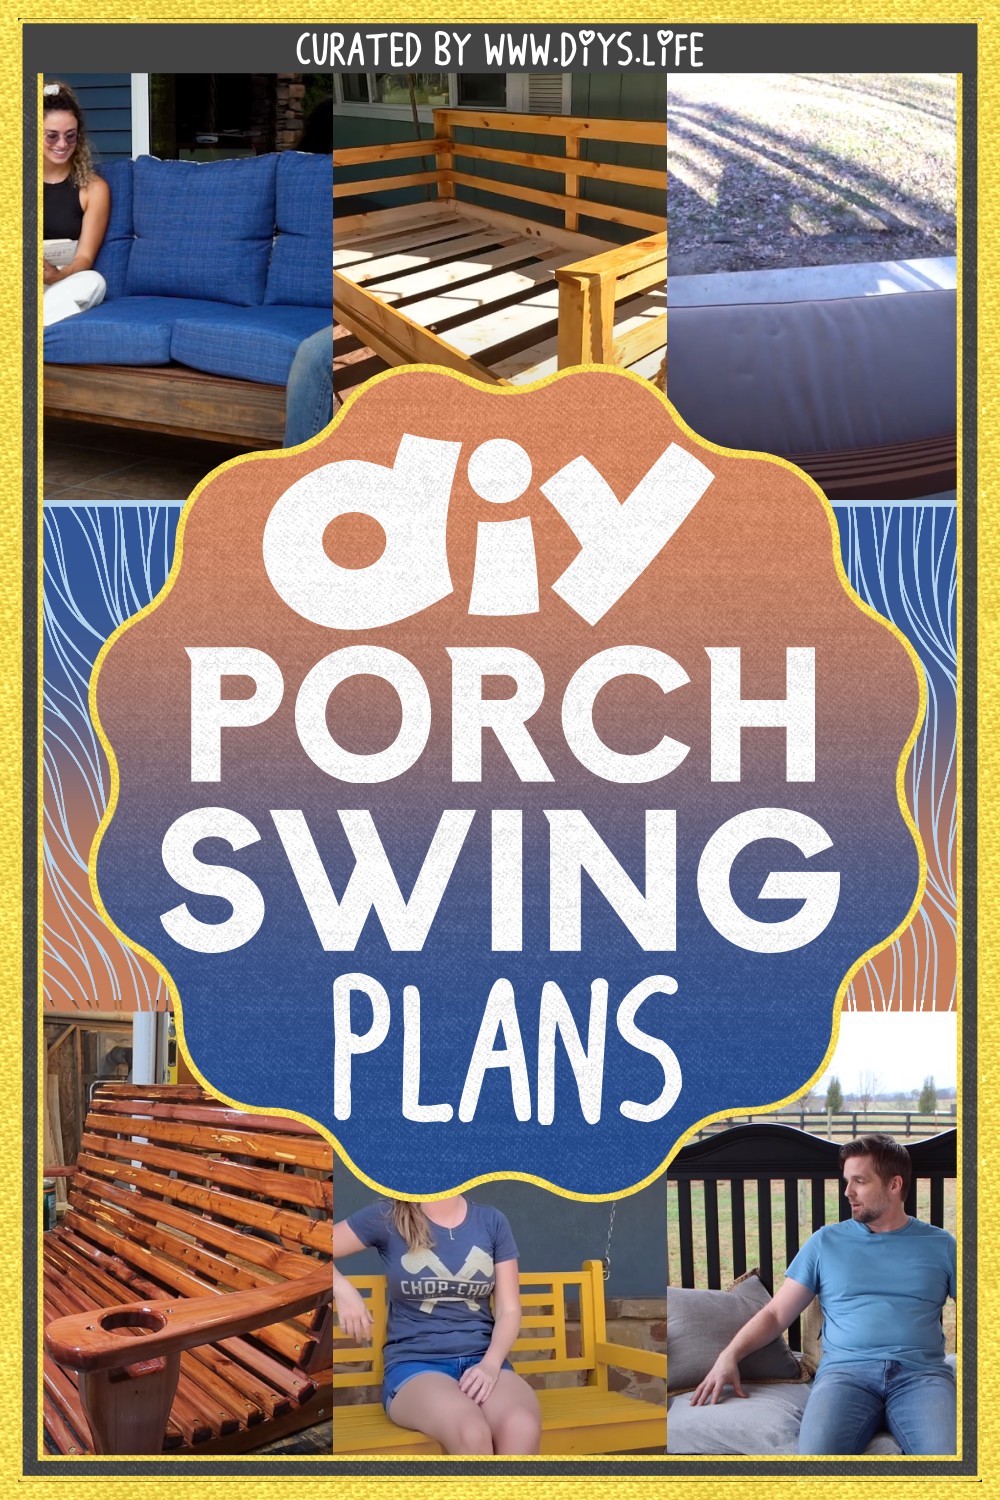 DIY Porch Swing Plans For Relaxing Along With Your Family